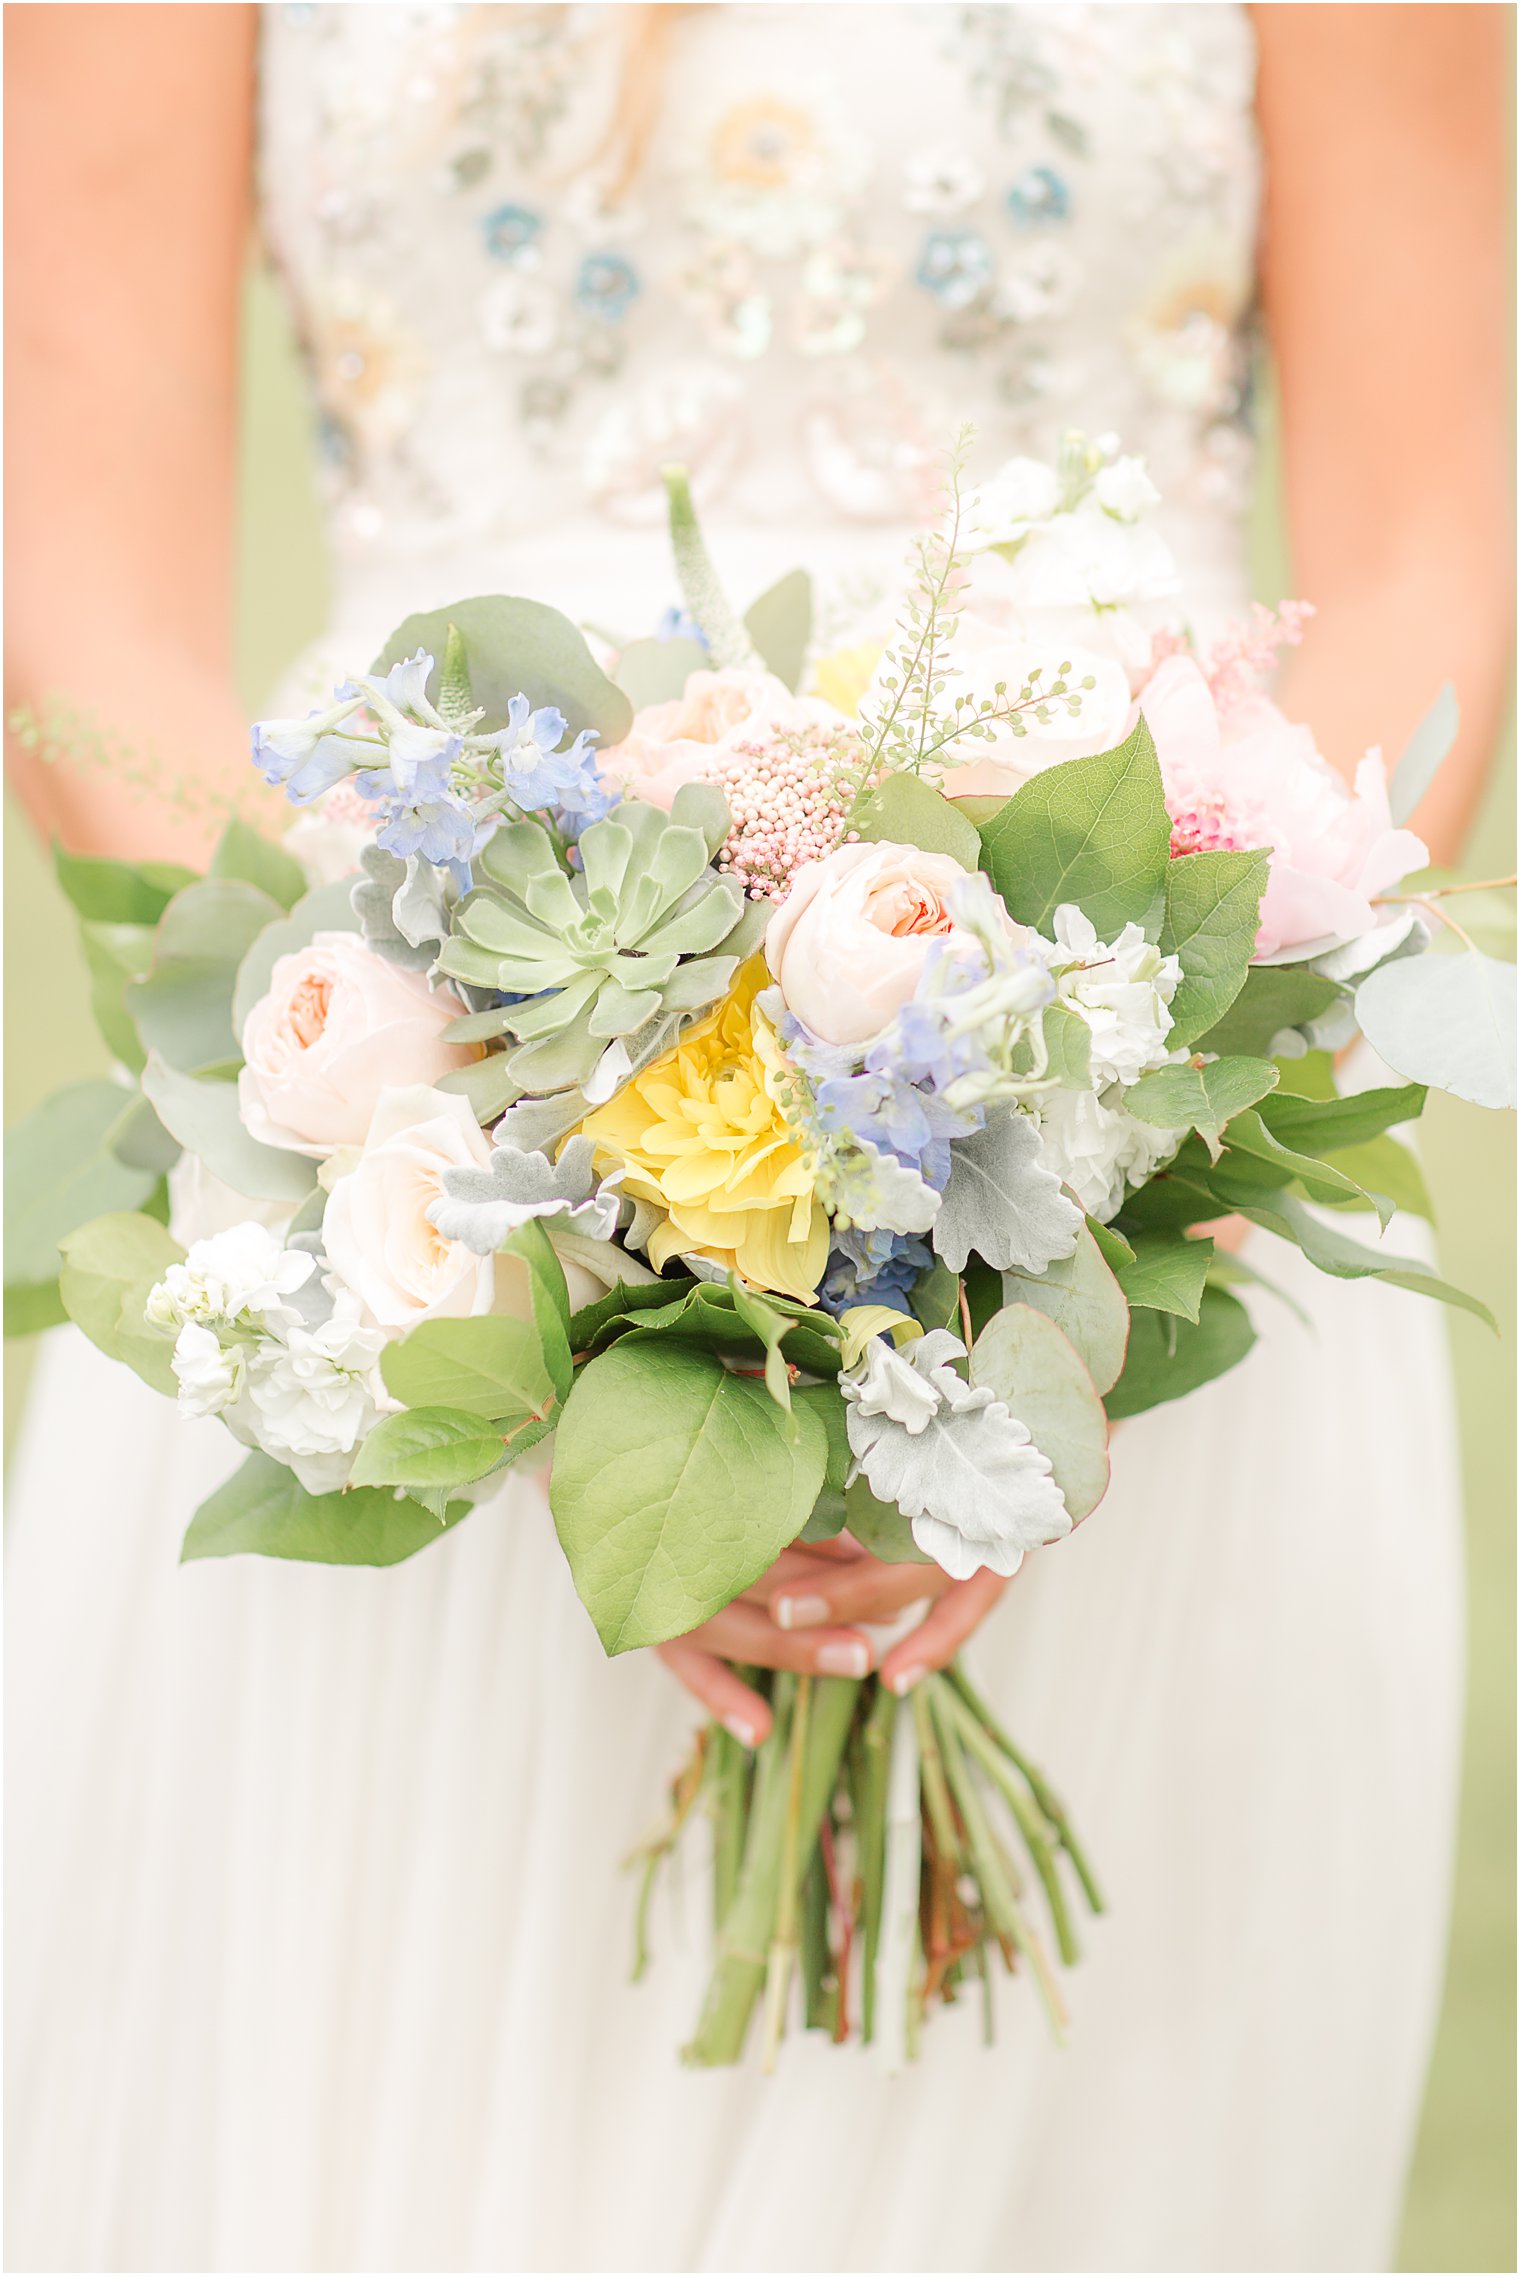 Bridal bouquet by Flowers by Melinda